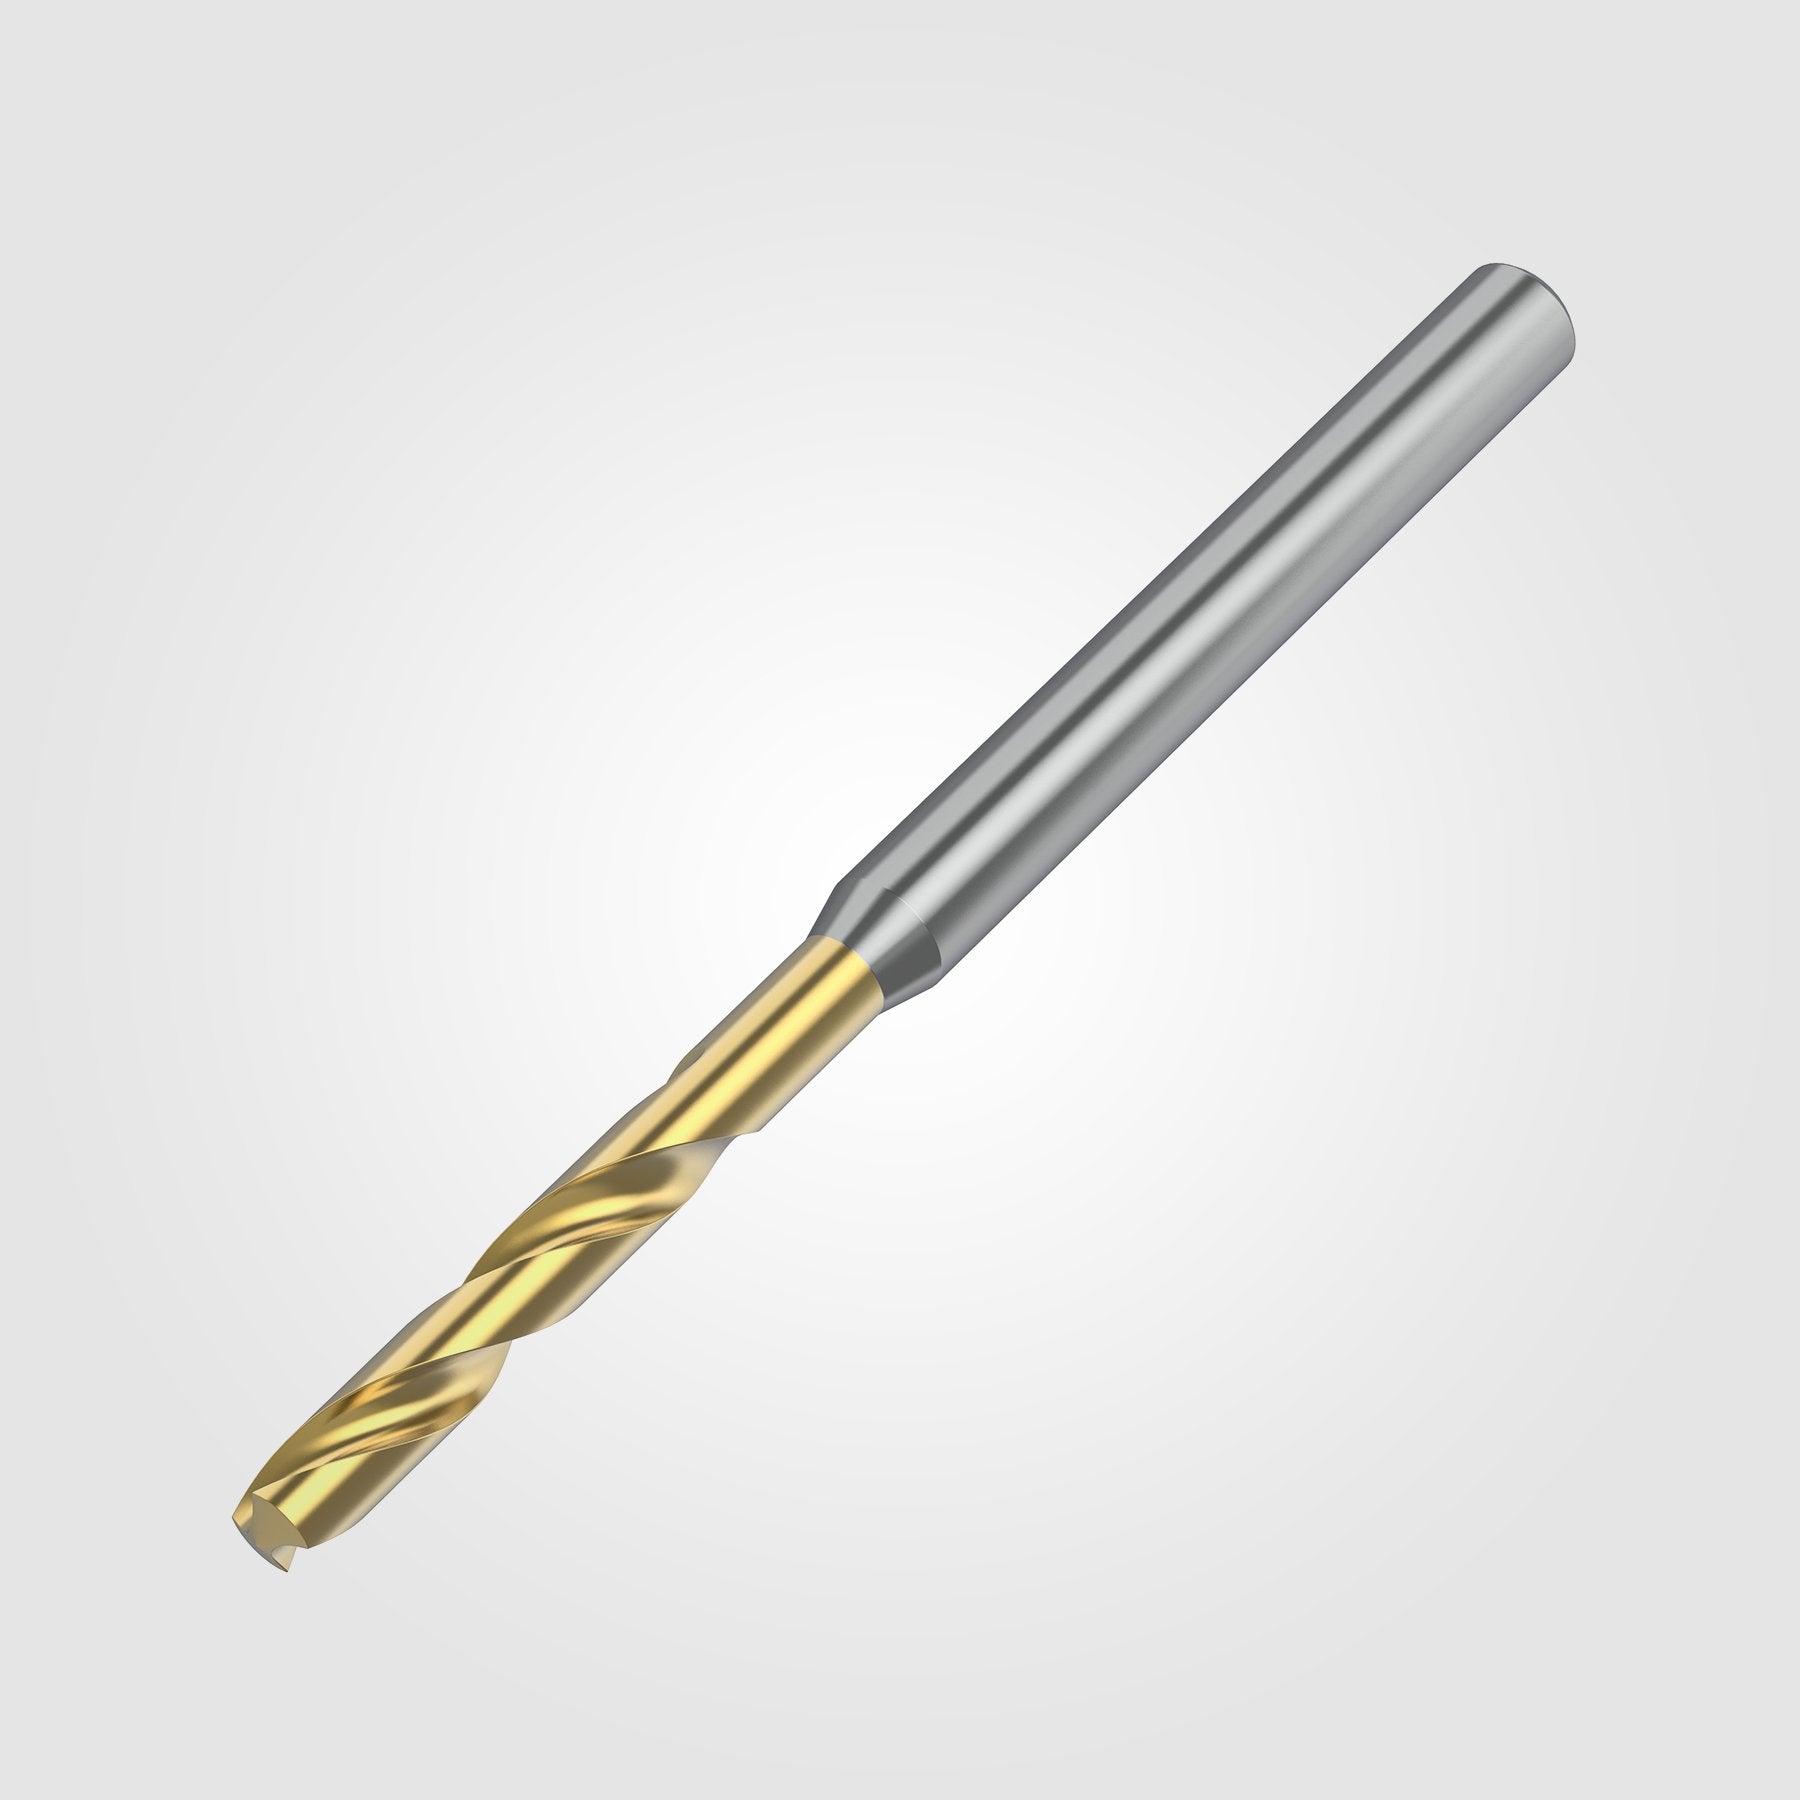 GOdrill (THROUGH COOLANT) | 18.654mm / .7344" / 8xD | SOLID CARBIDE DRILL | 4149863